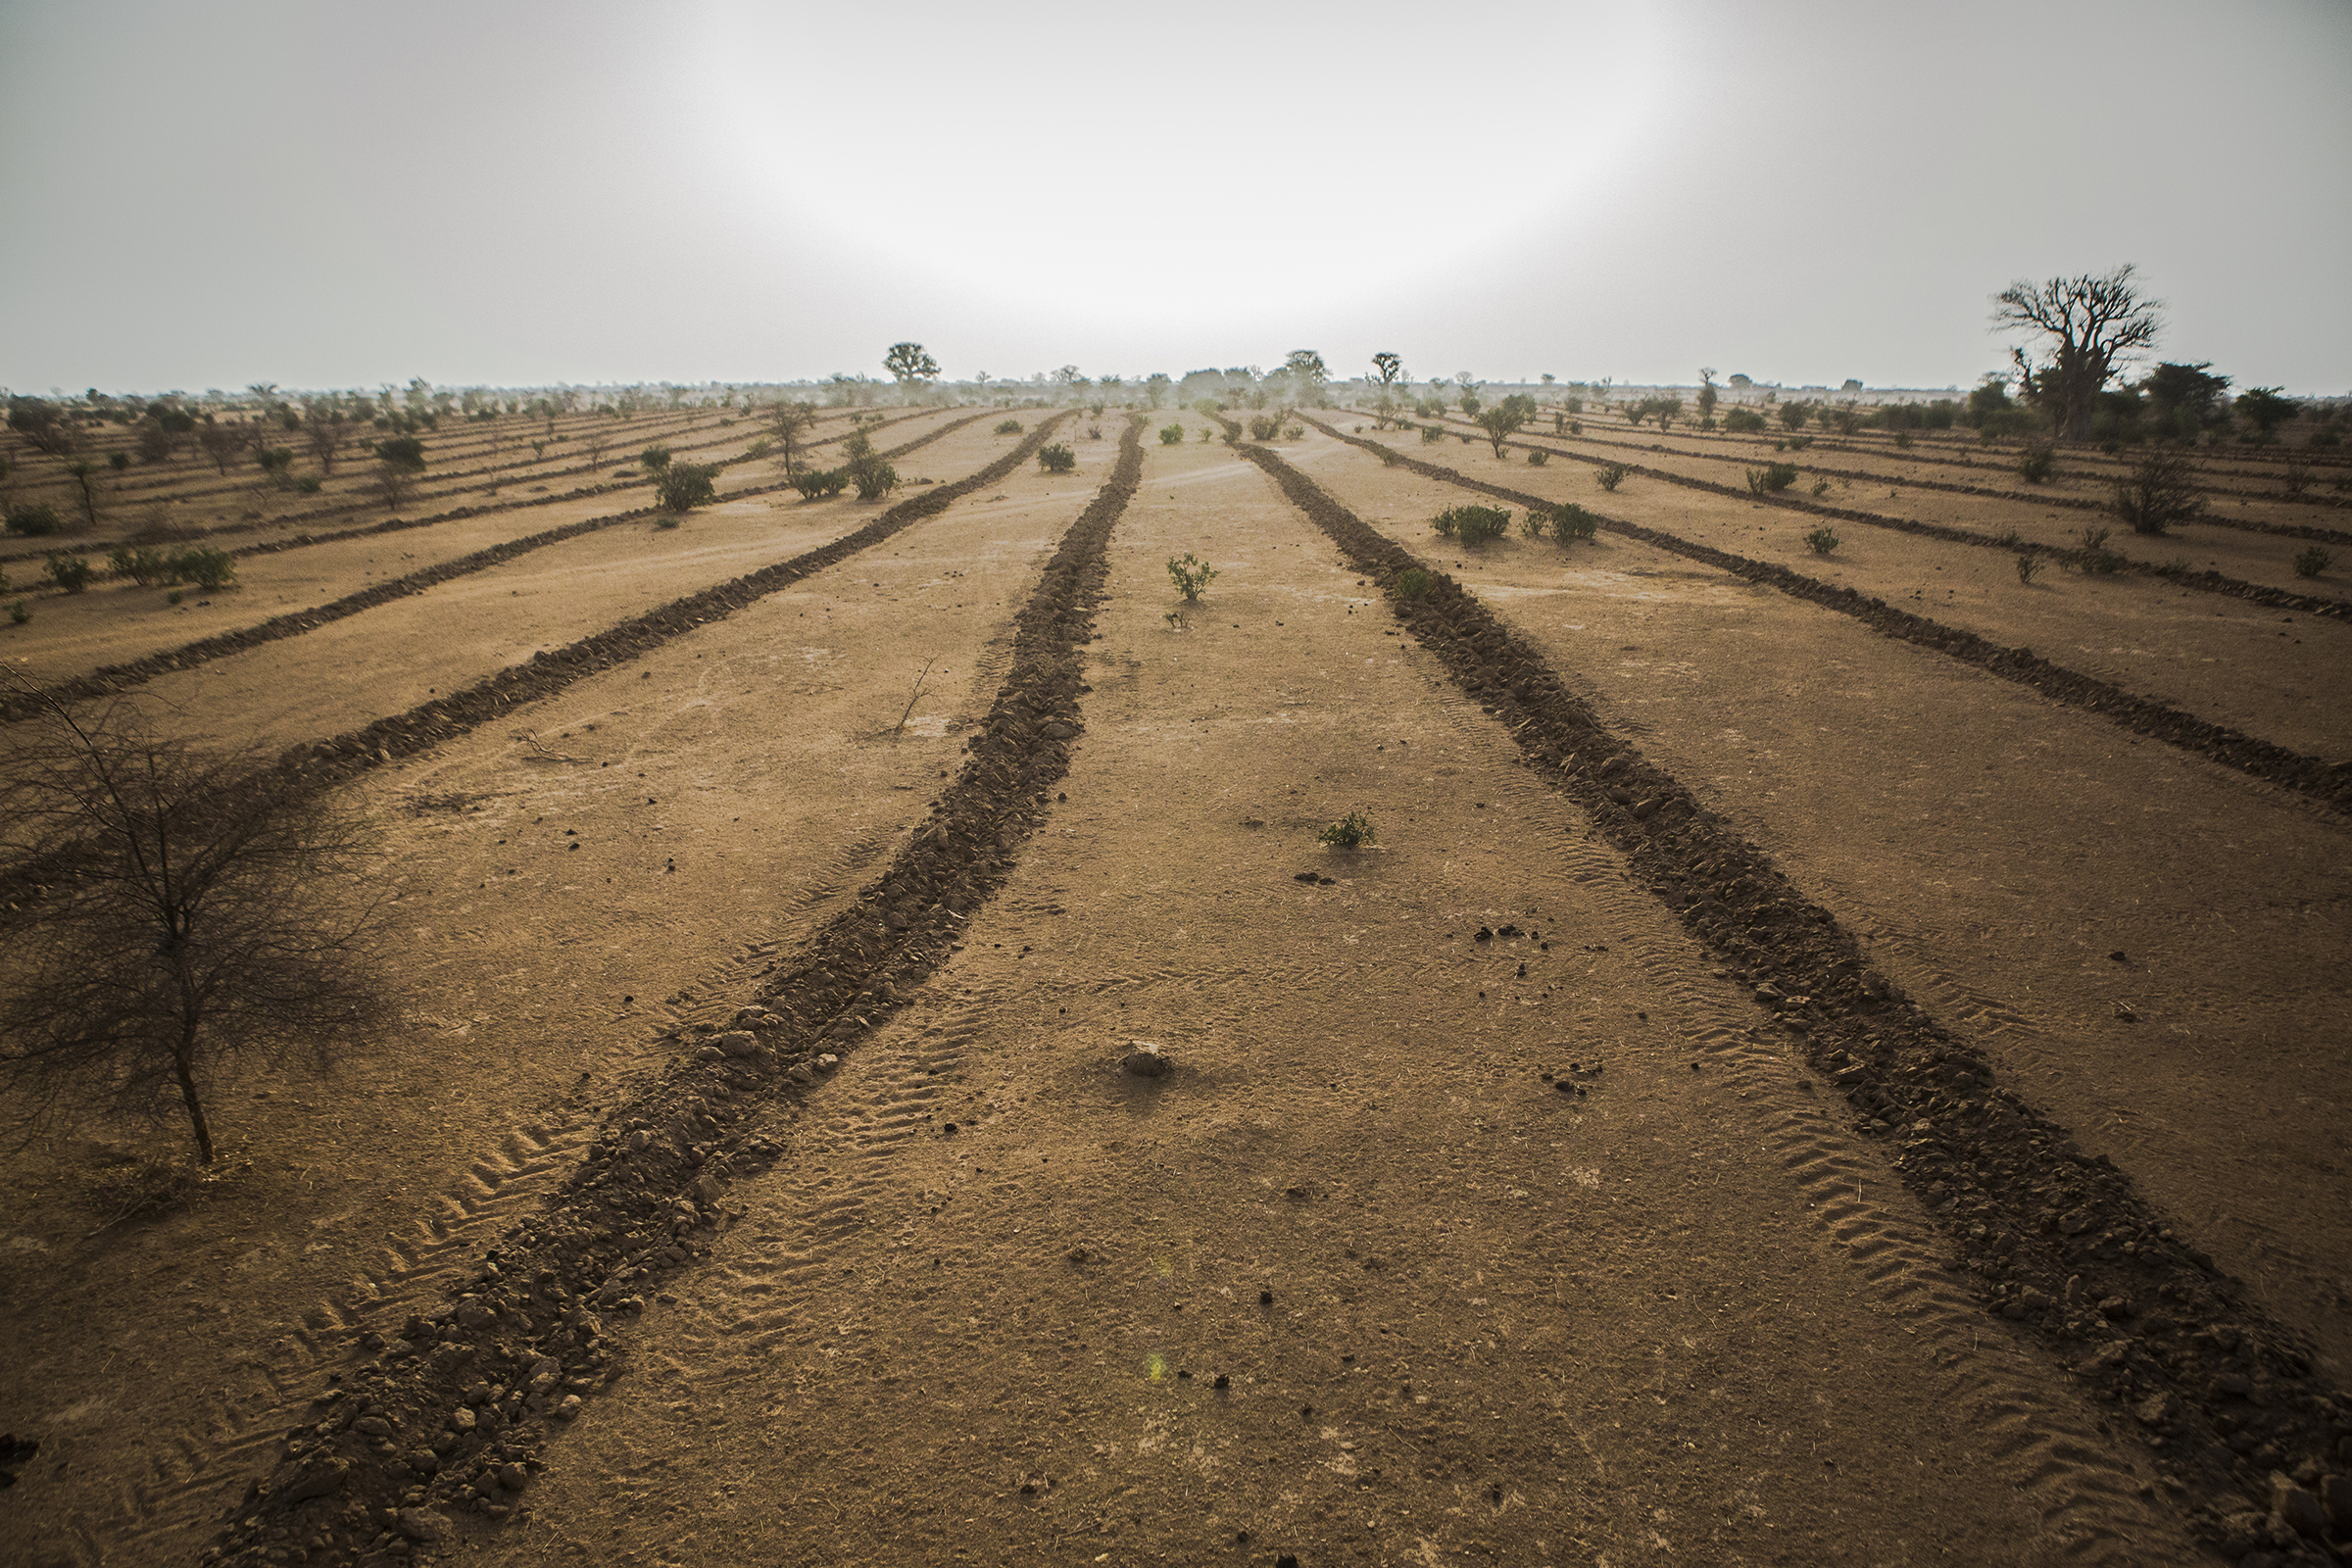 Land in Mbar Toubab, Senegal, which was plowed in anticipation of the planting of seedlings for the Great Green Wall